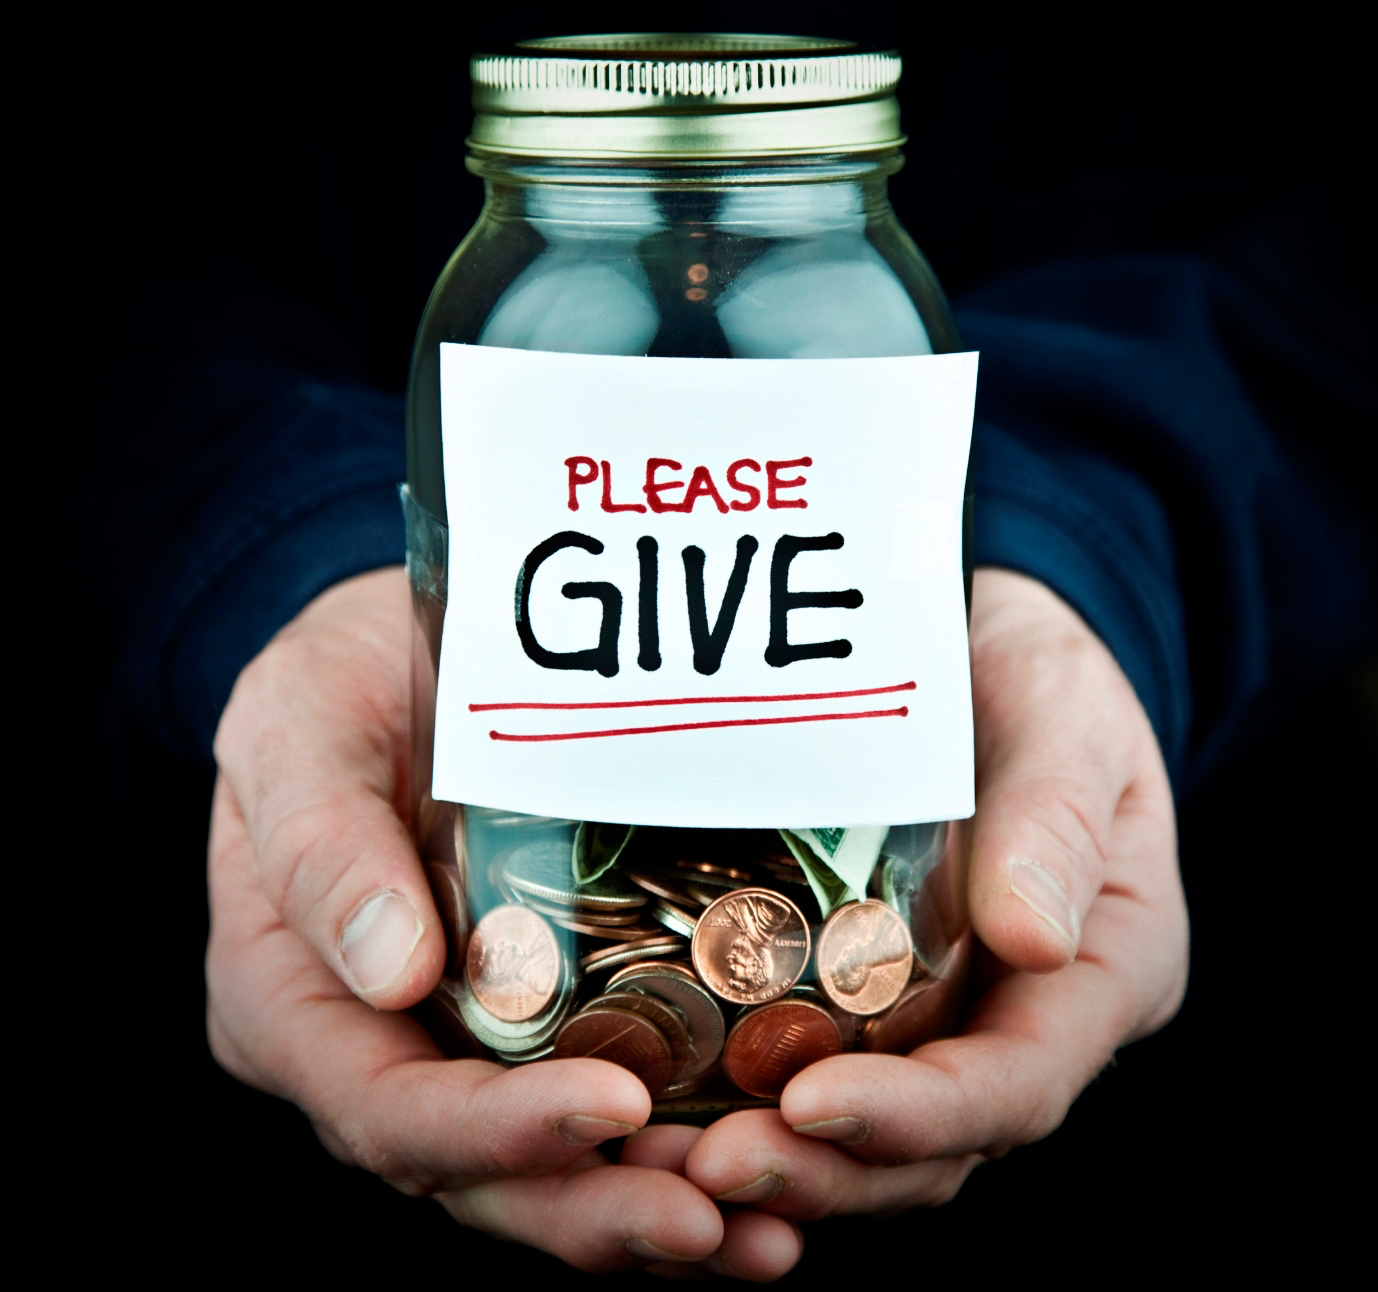 Please give your